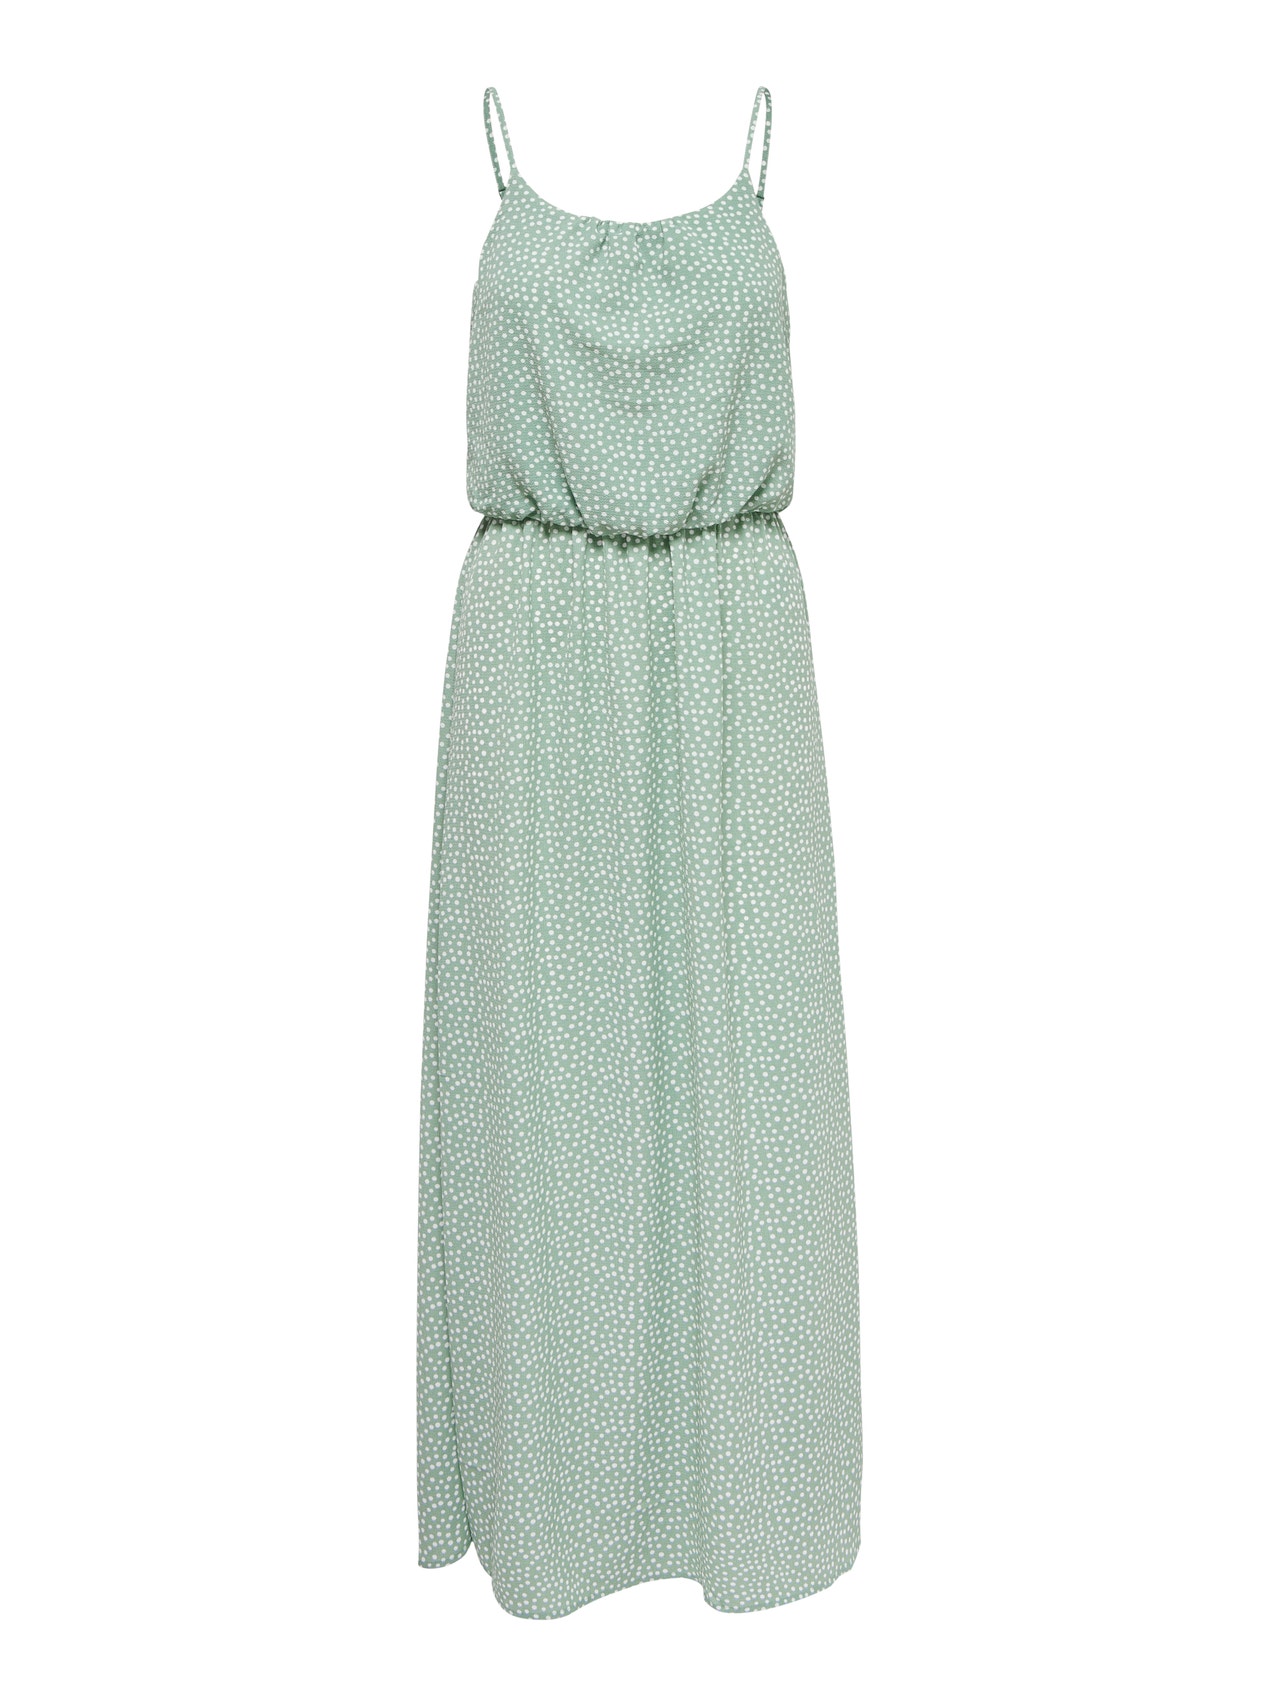 ONLY Sin mangas Vestido maxi -Chinois Green - 15177381